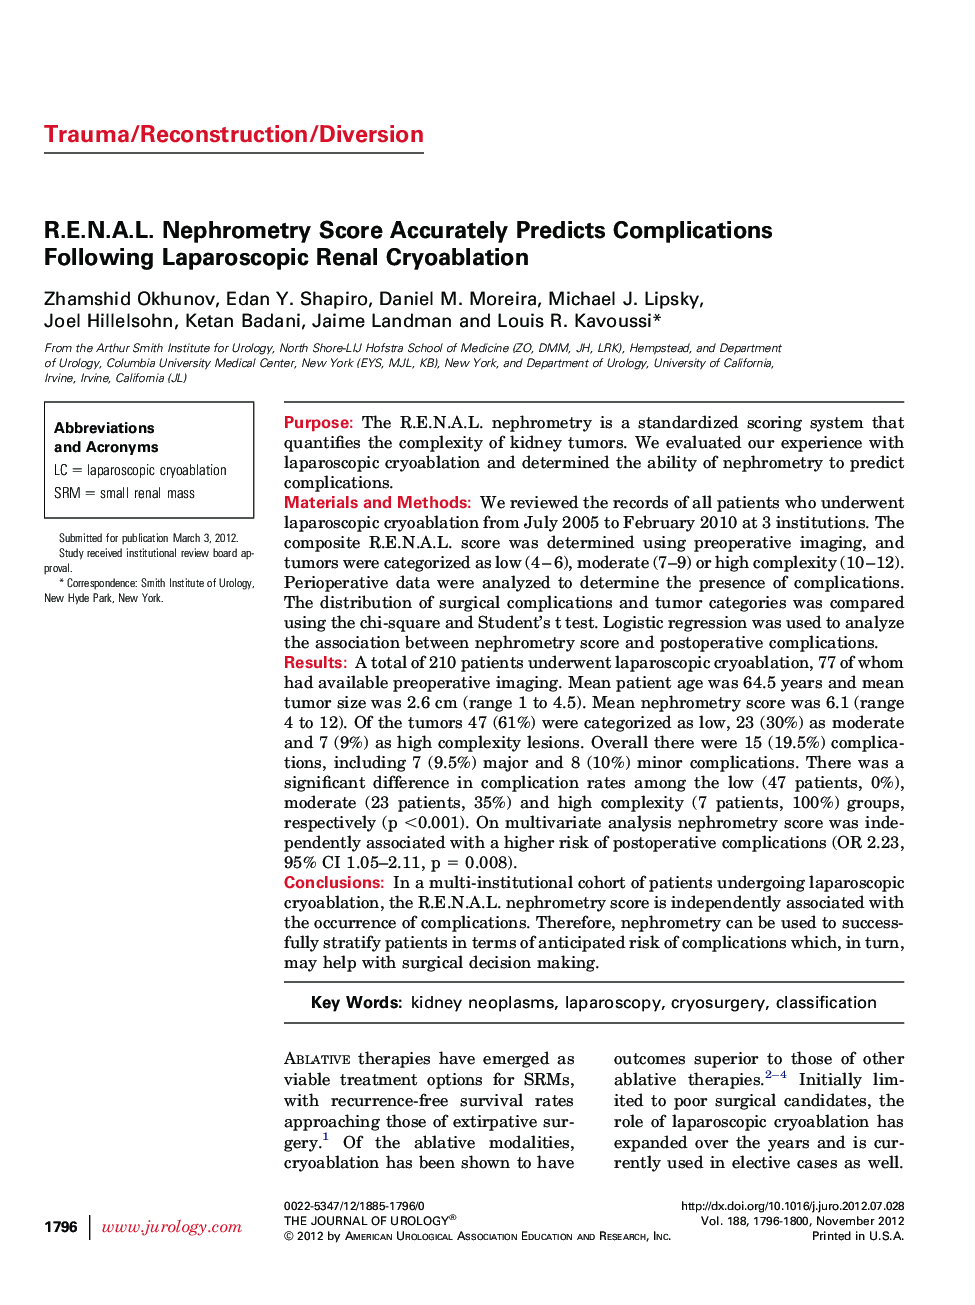 R.E.N.A.L. Nephrometry Score Accurately Predicts Complications Following Laparoscopic Renal Cryoablation